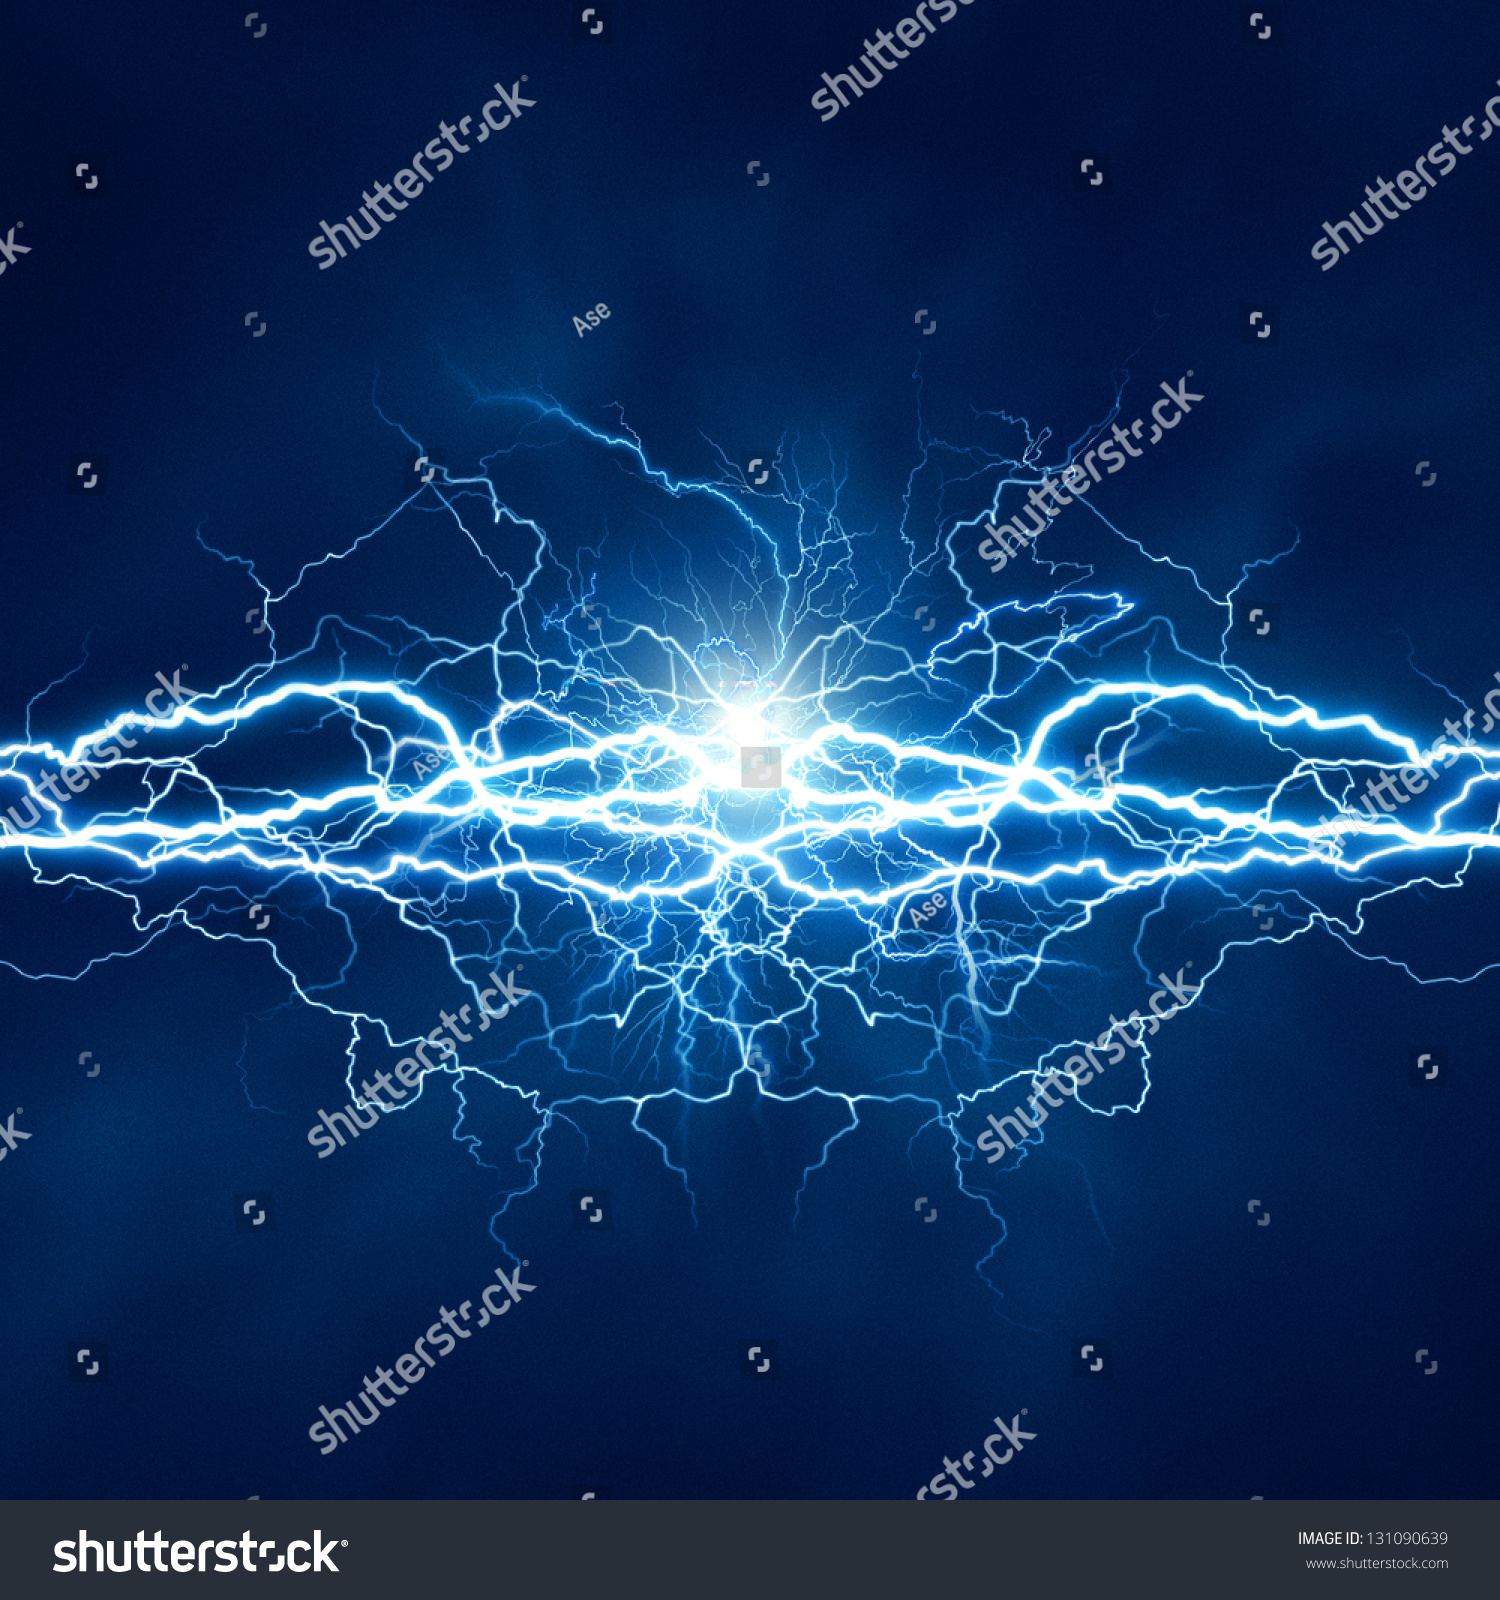 Electric lighting effect, abstract techno backgrounds for your design #131090639